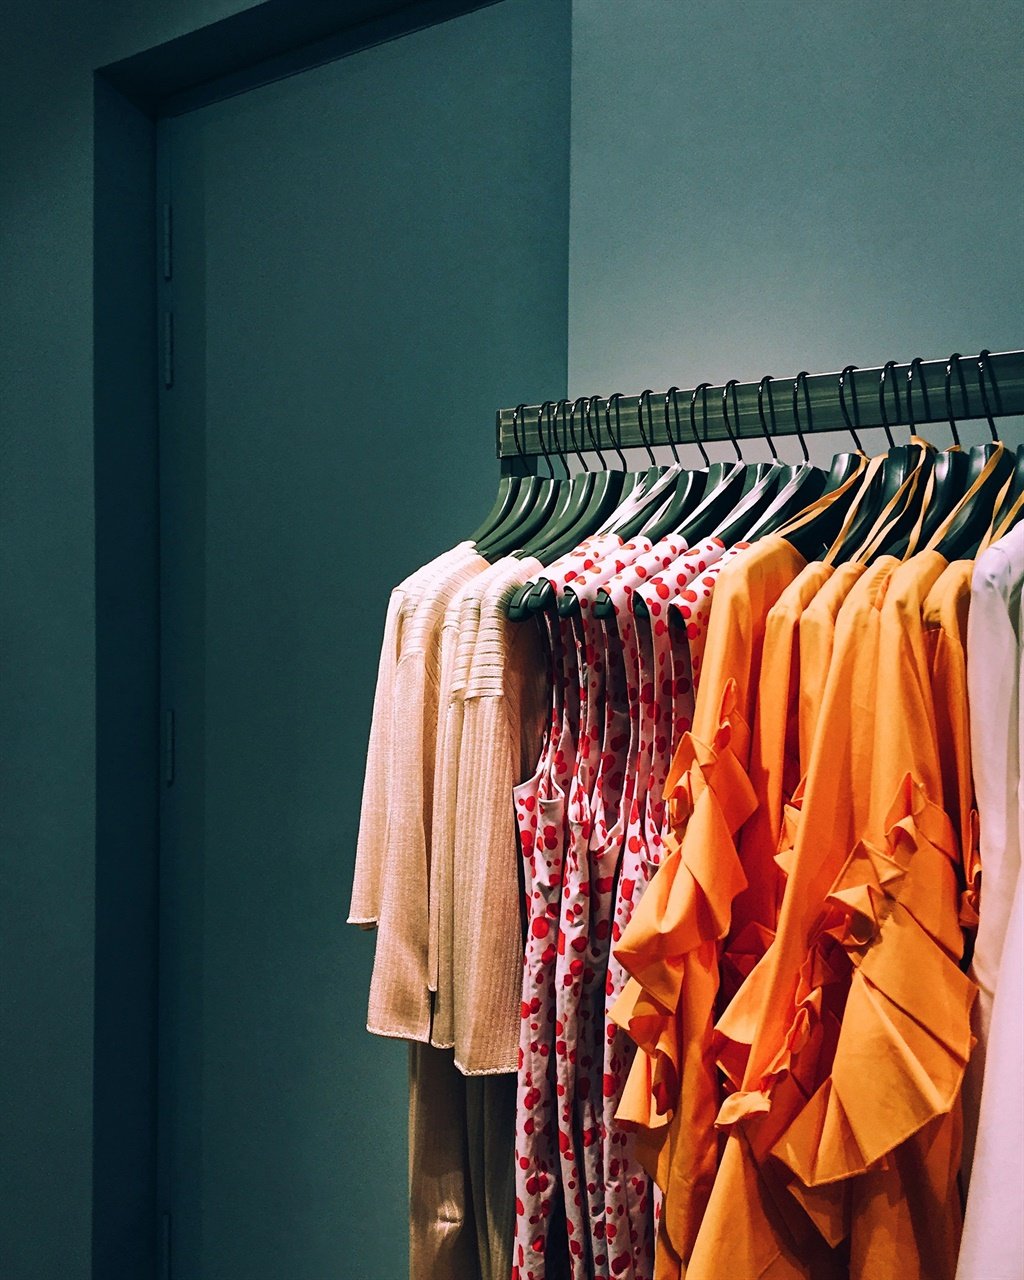 Going shopping can feel like a chore more than retail therapy when you have to queue